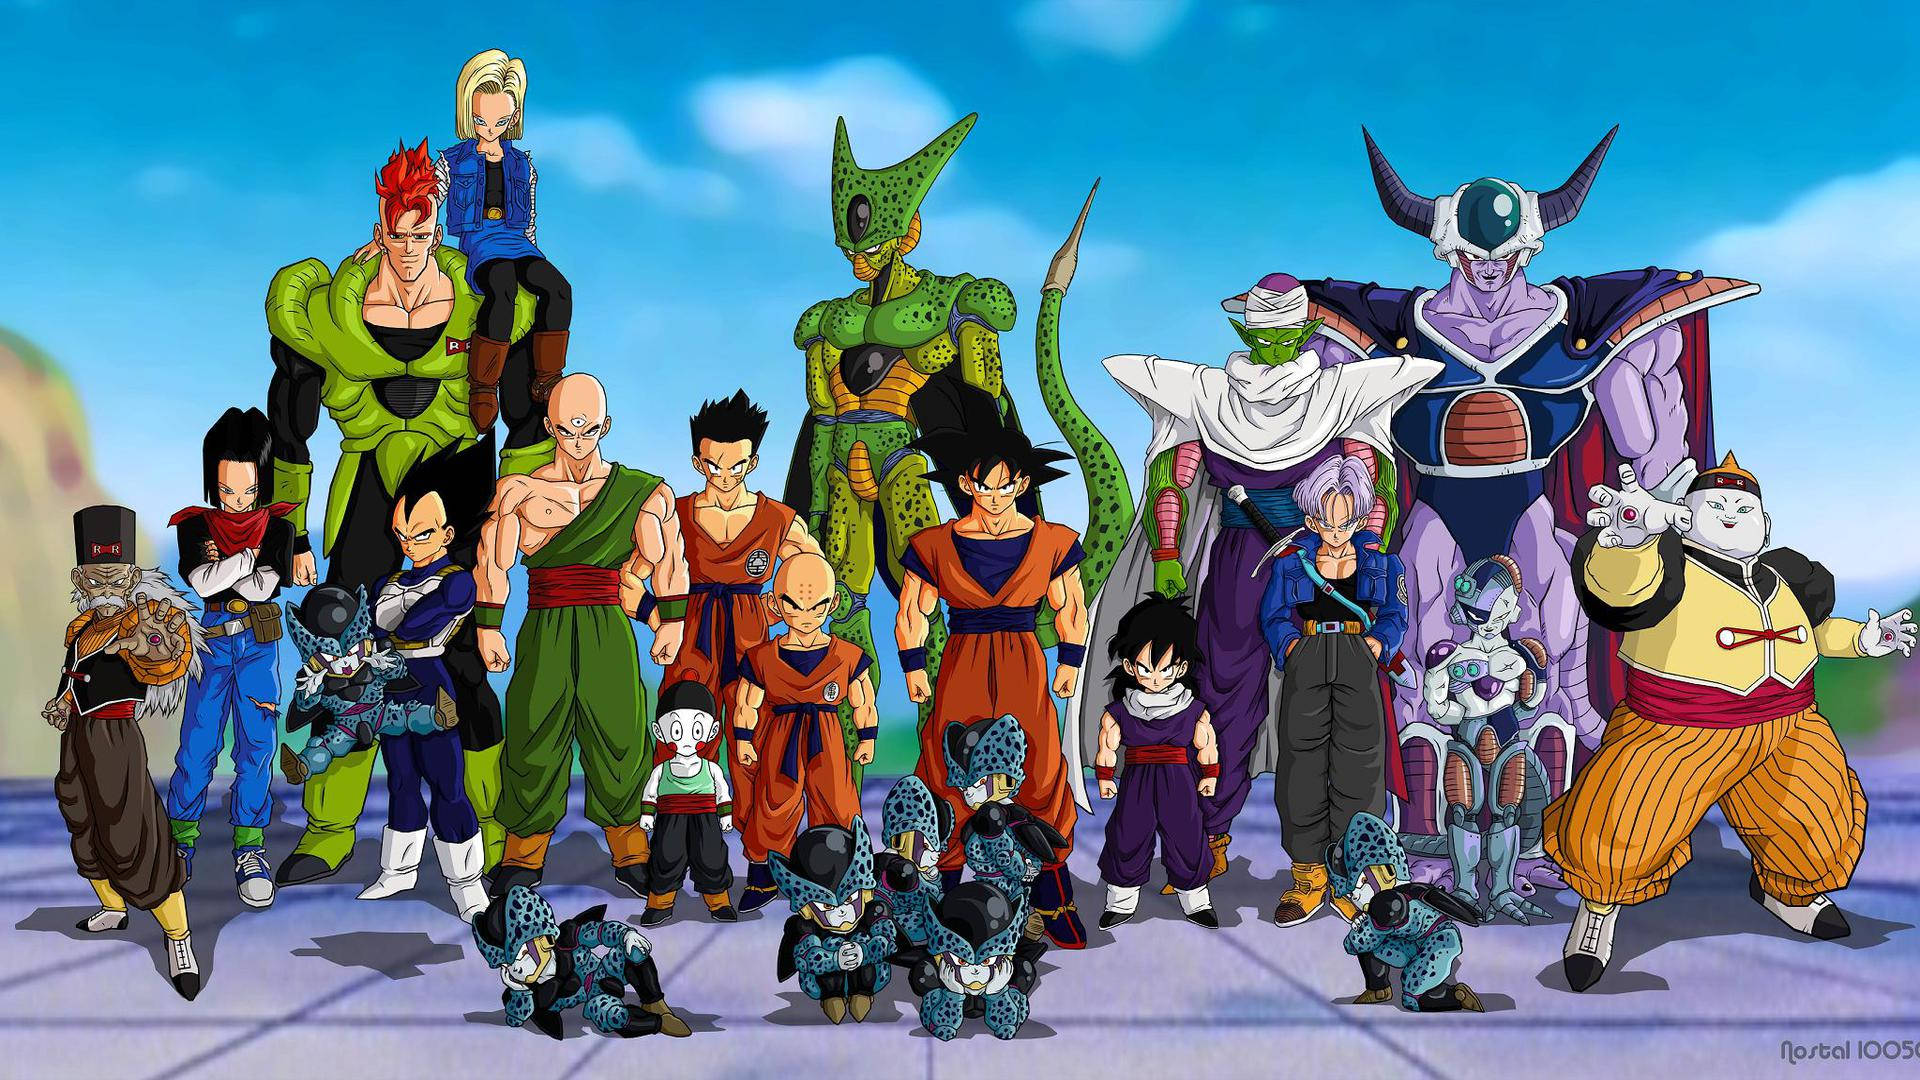 Follow the Adventures of the Dragon Ball Z Heroes Wallpaper